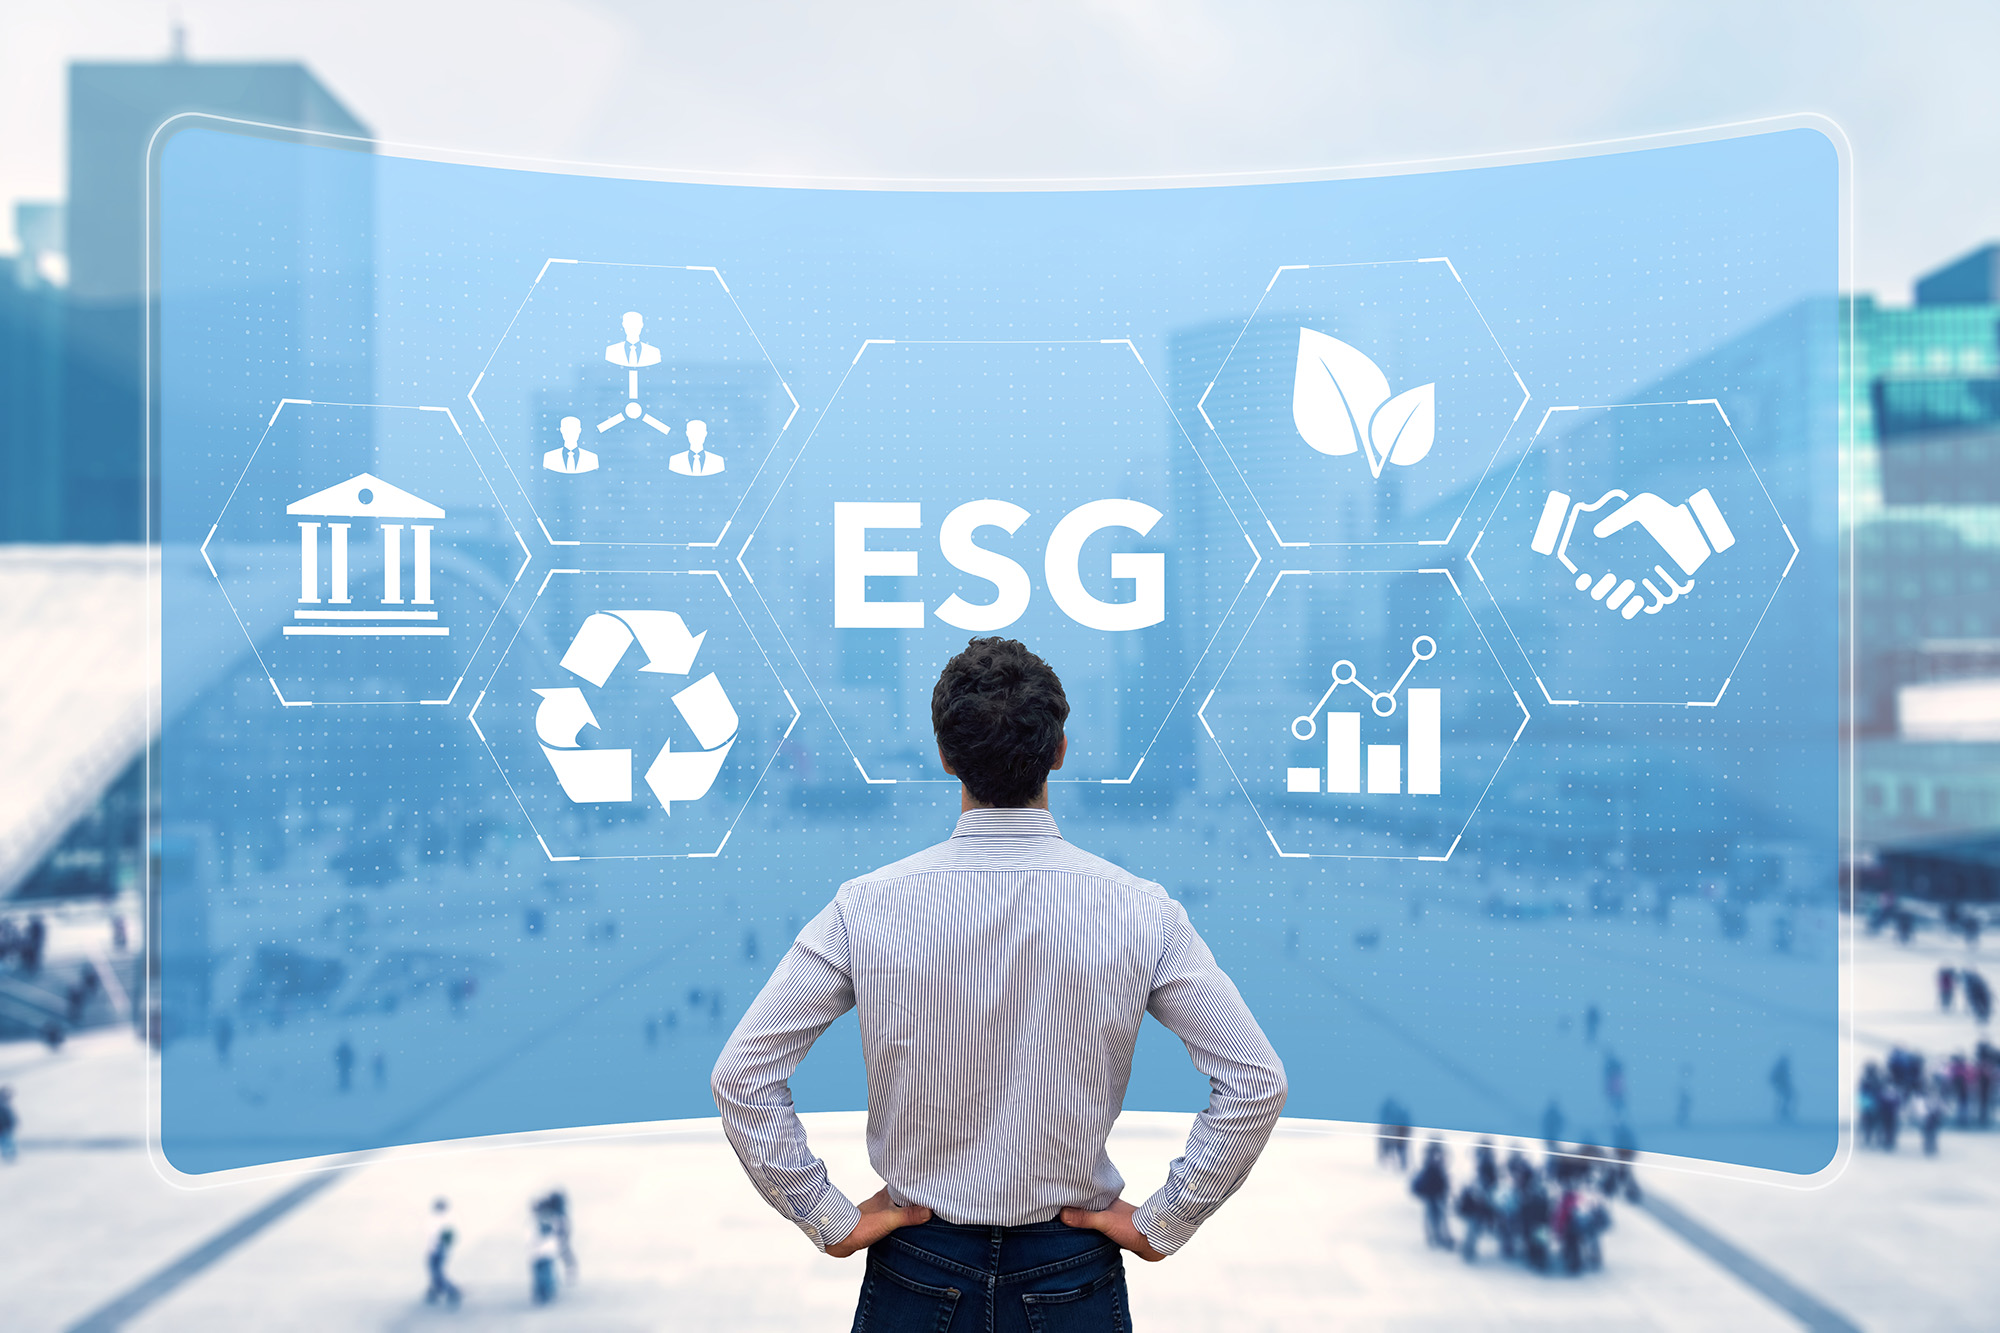 Learn more about Environmental, Social, and Governance (ESG) initiatives and tax credits that have been growing within the business community.